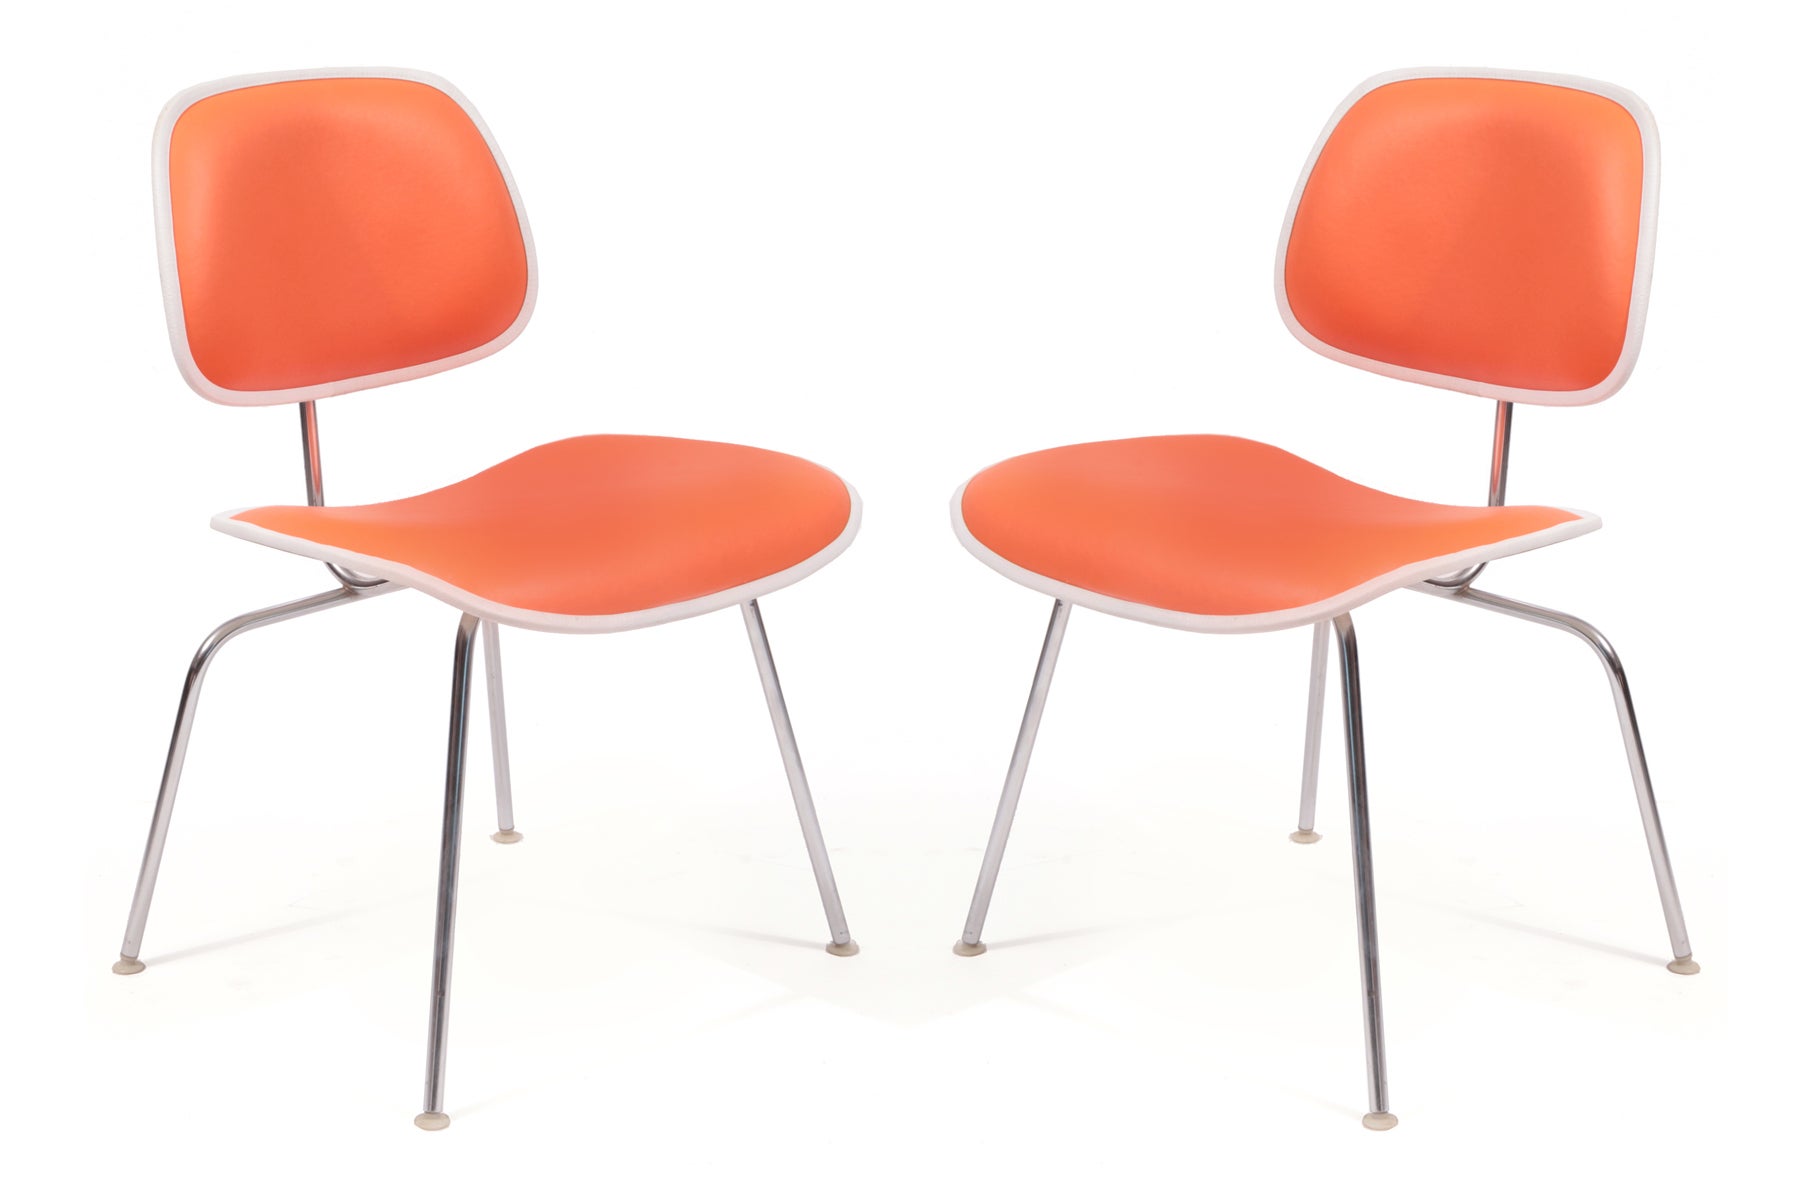 Eames Herman Miller DCM Chairs